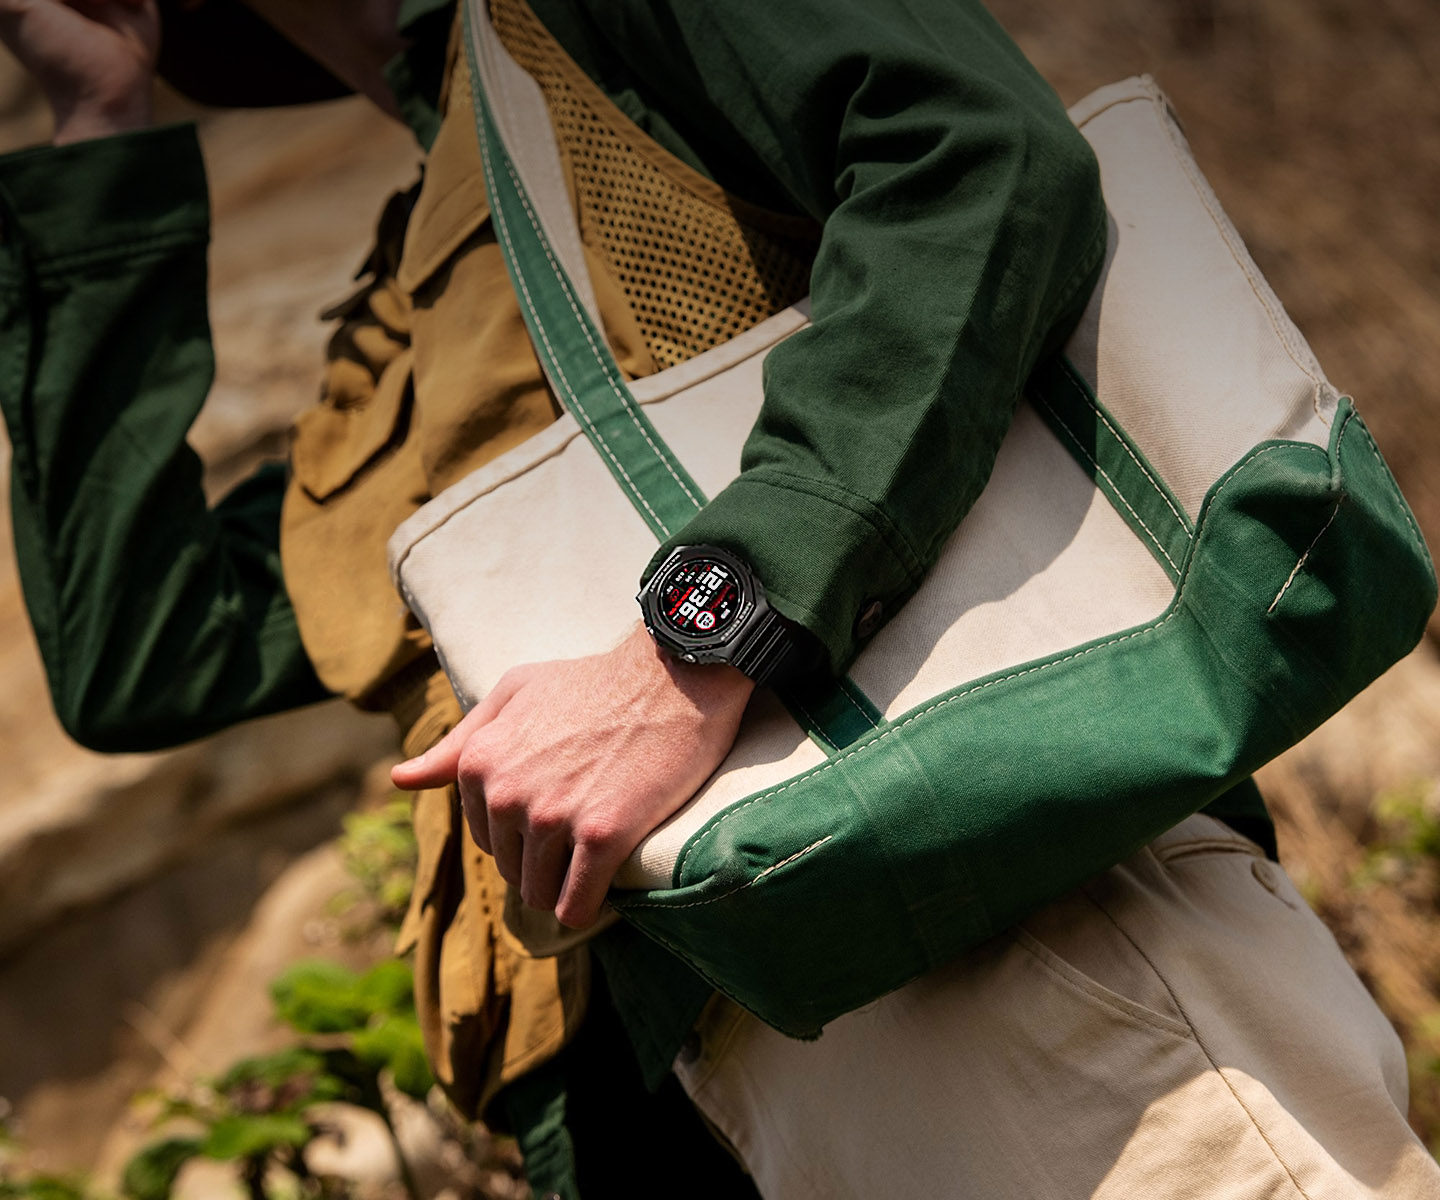 Smartwatch Zeblaze Ares 2 on the hand of a man in a green jacket